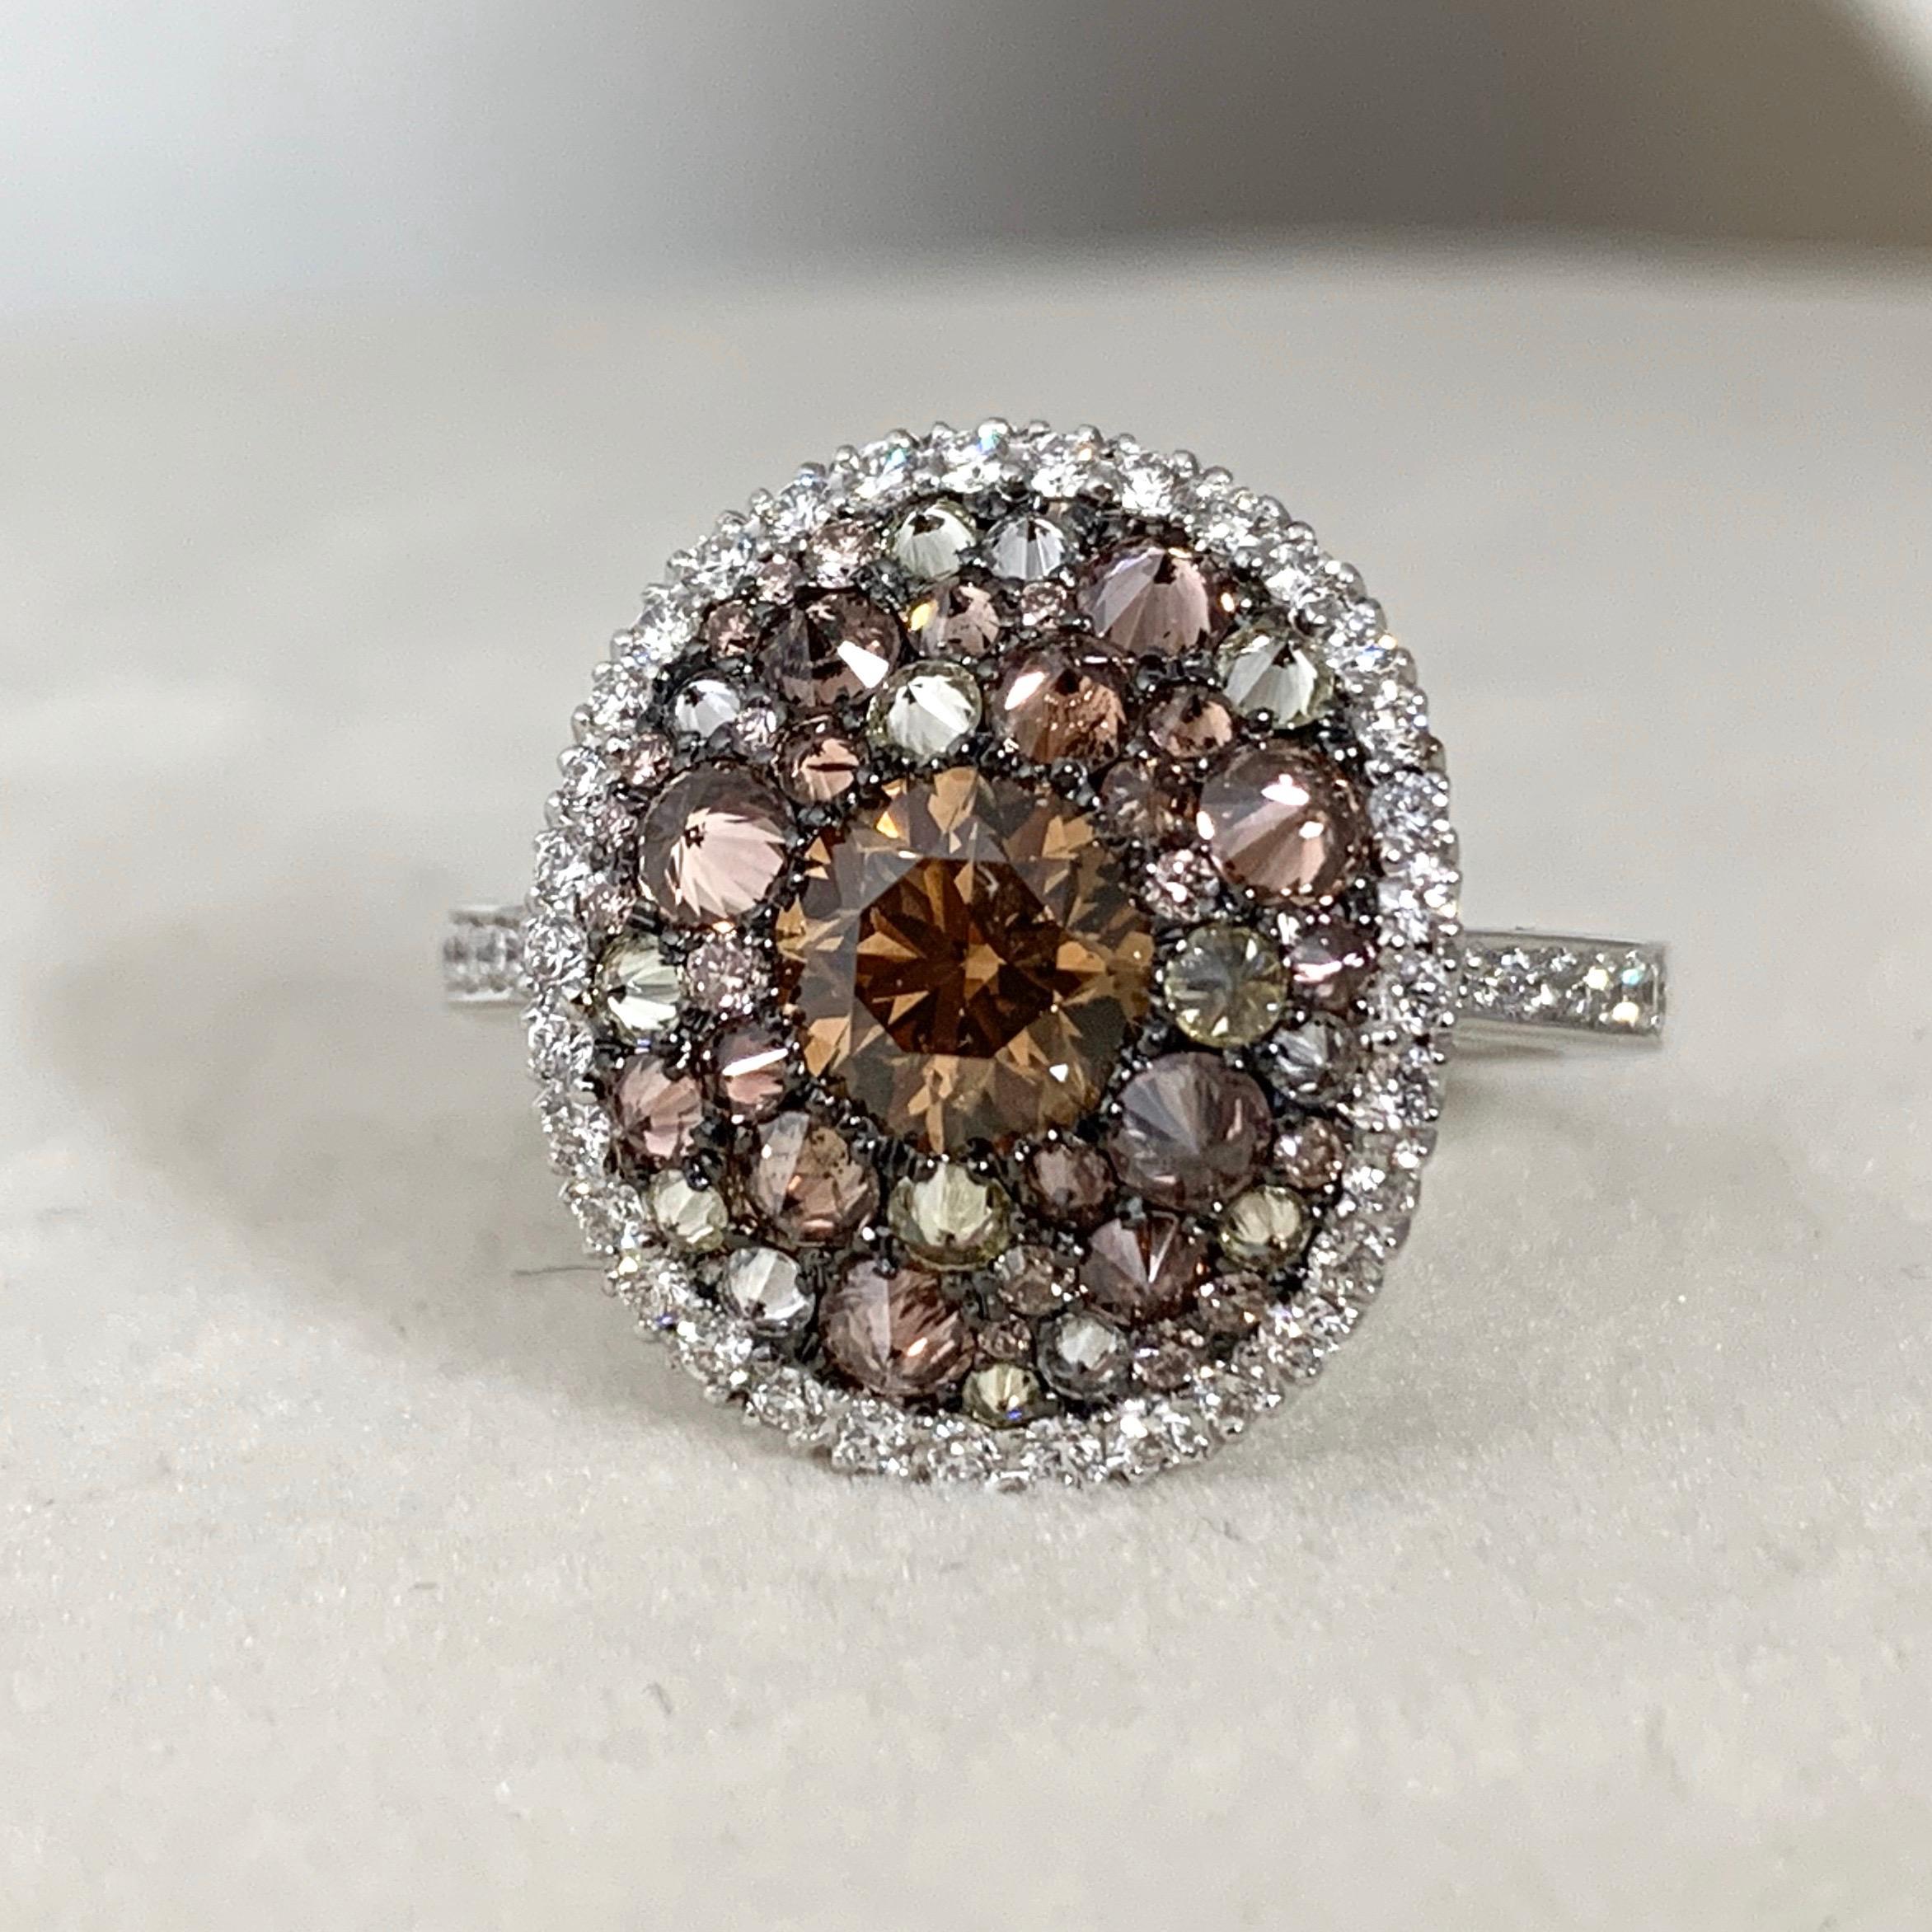 One of a kind ring made in Belgium by jewellery artist Joke Quick in 18K White gold 7,4 g set with a 0,80 Ct. Argyle Certified Brown Diamond. Mix of Upside down and regular pave set:  Fancy chocolate pink brilliant-cut diamonds 0,85 ct., Fancy lemon